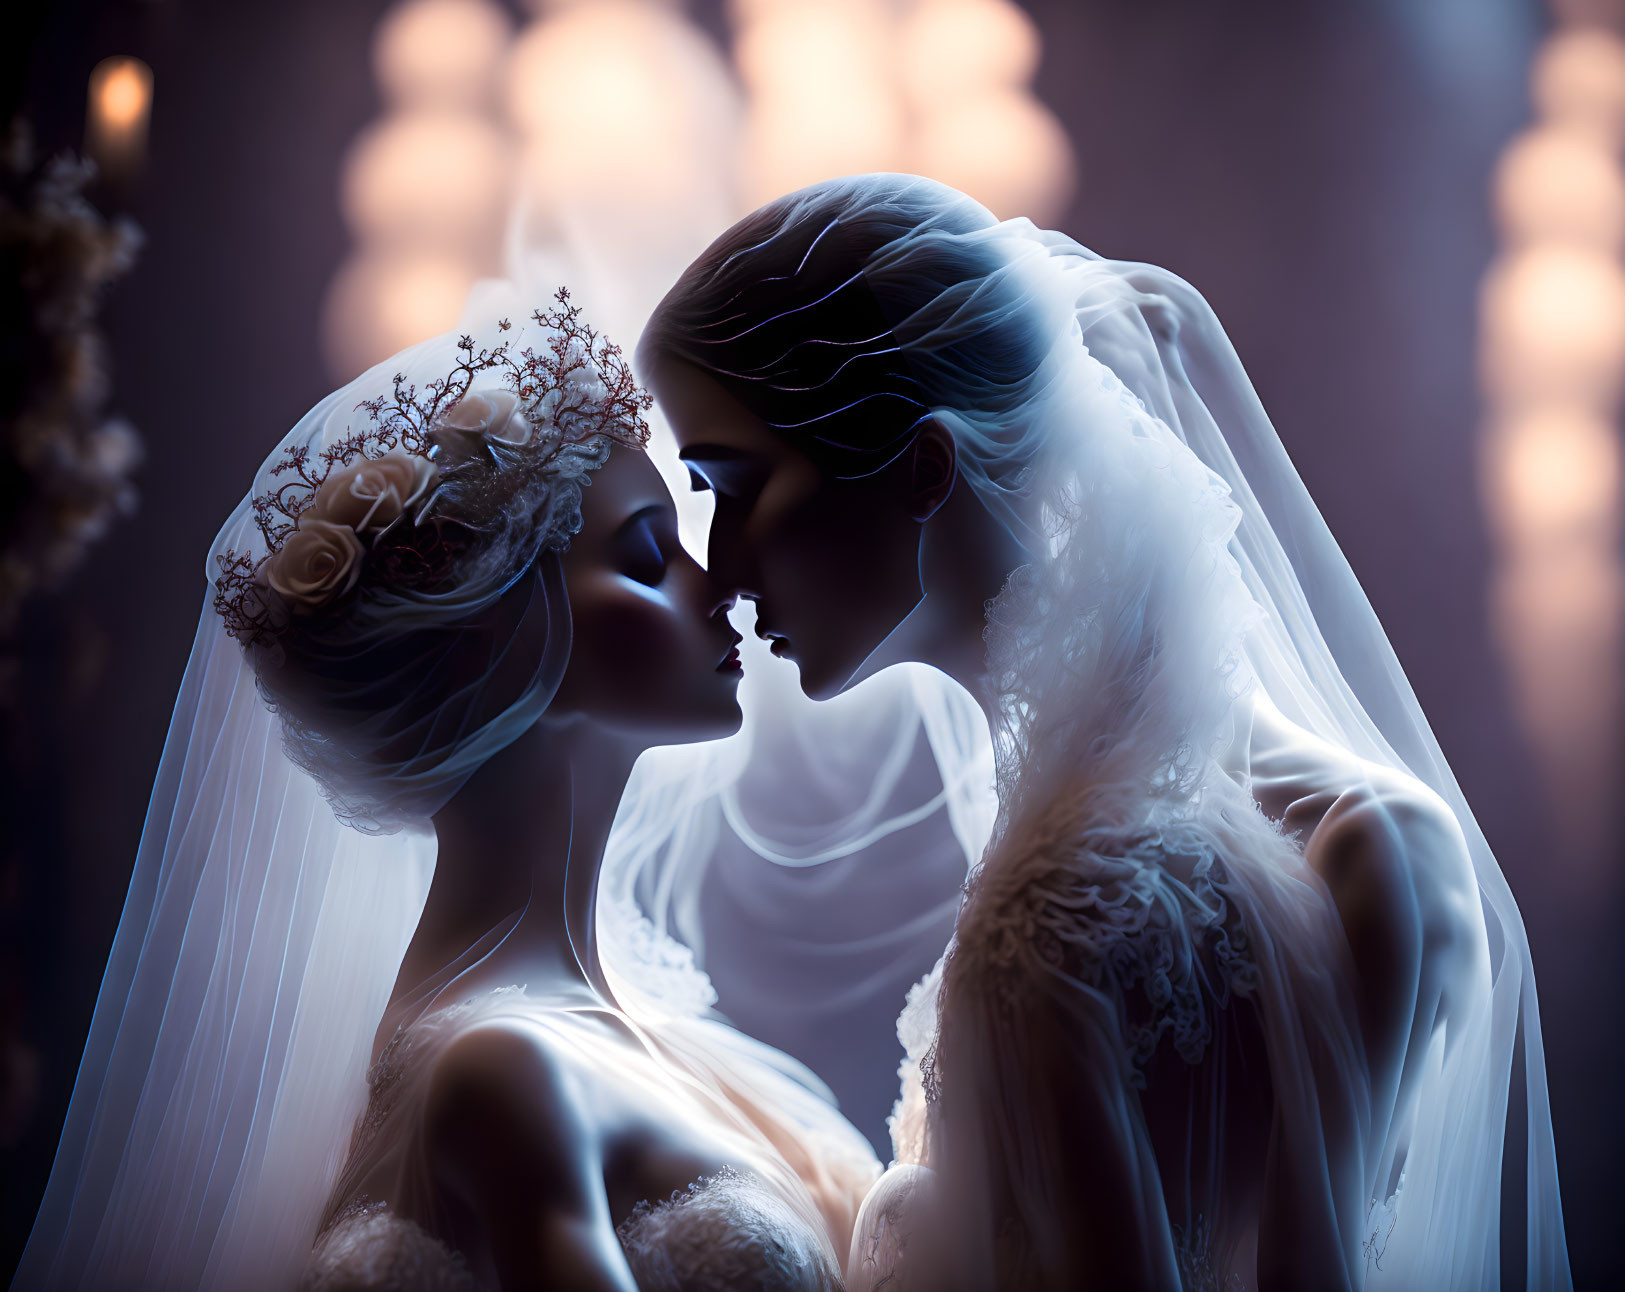 Intimate portrait of two brides with elegant veils and floral headpieces